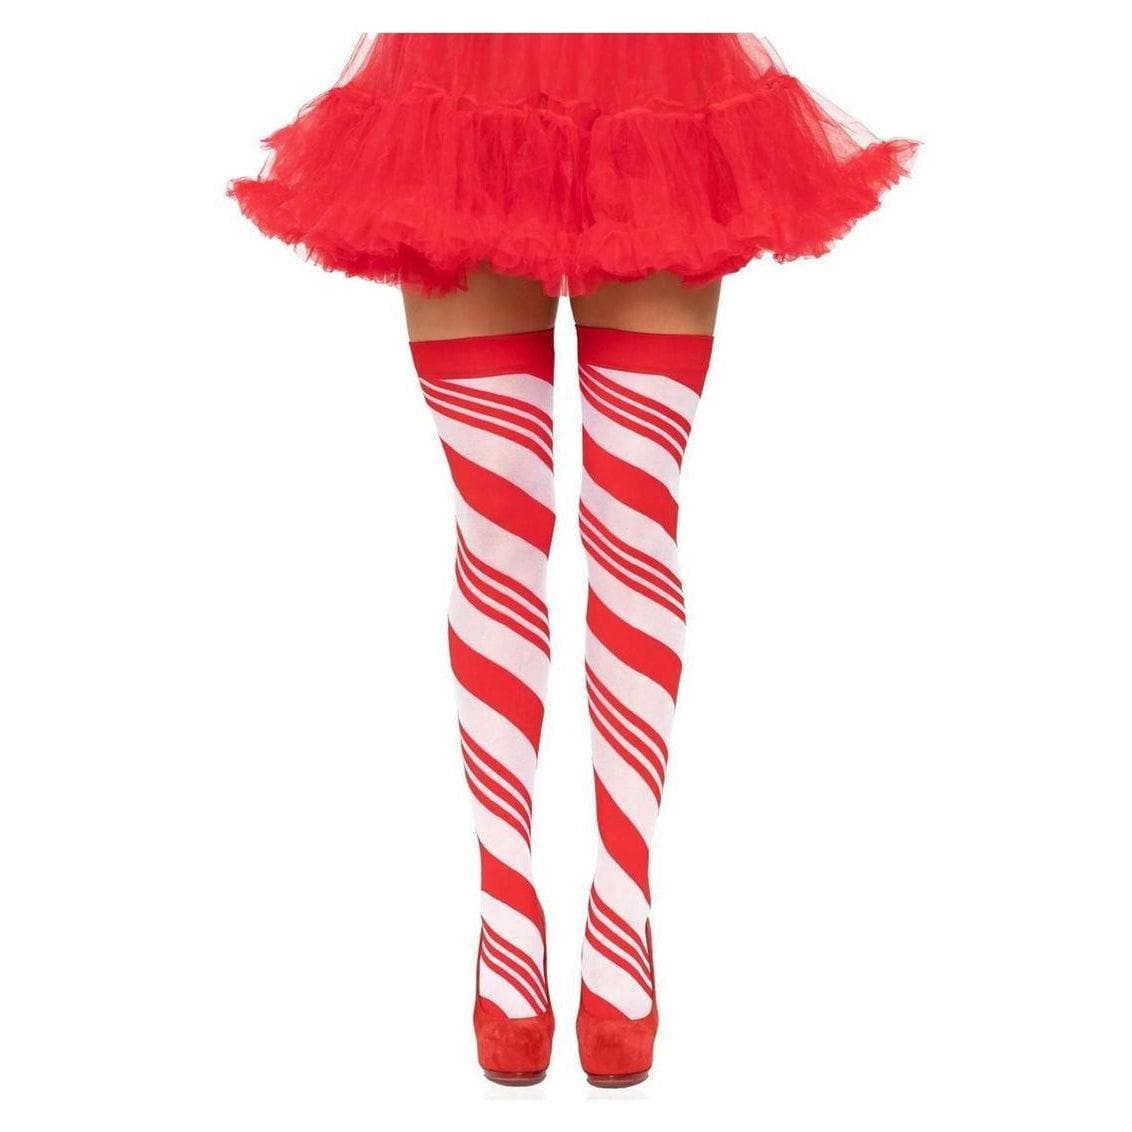 Leg Avenue Spandex Sheer Candy Cane Striped Thigh Highs One Size Red/White - Romantic Blessings